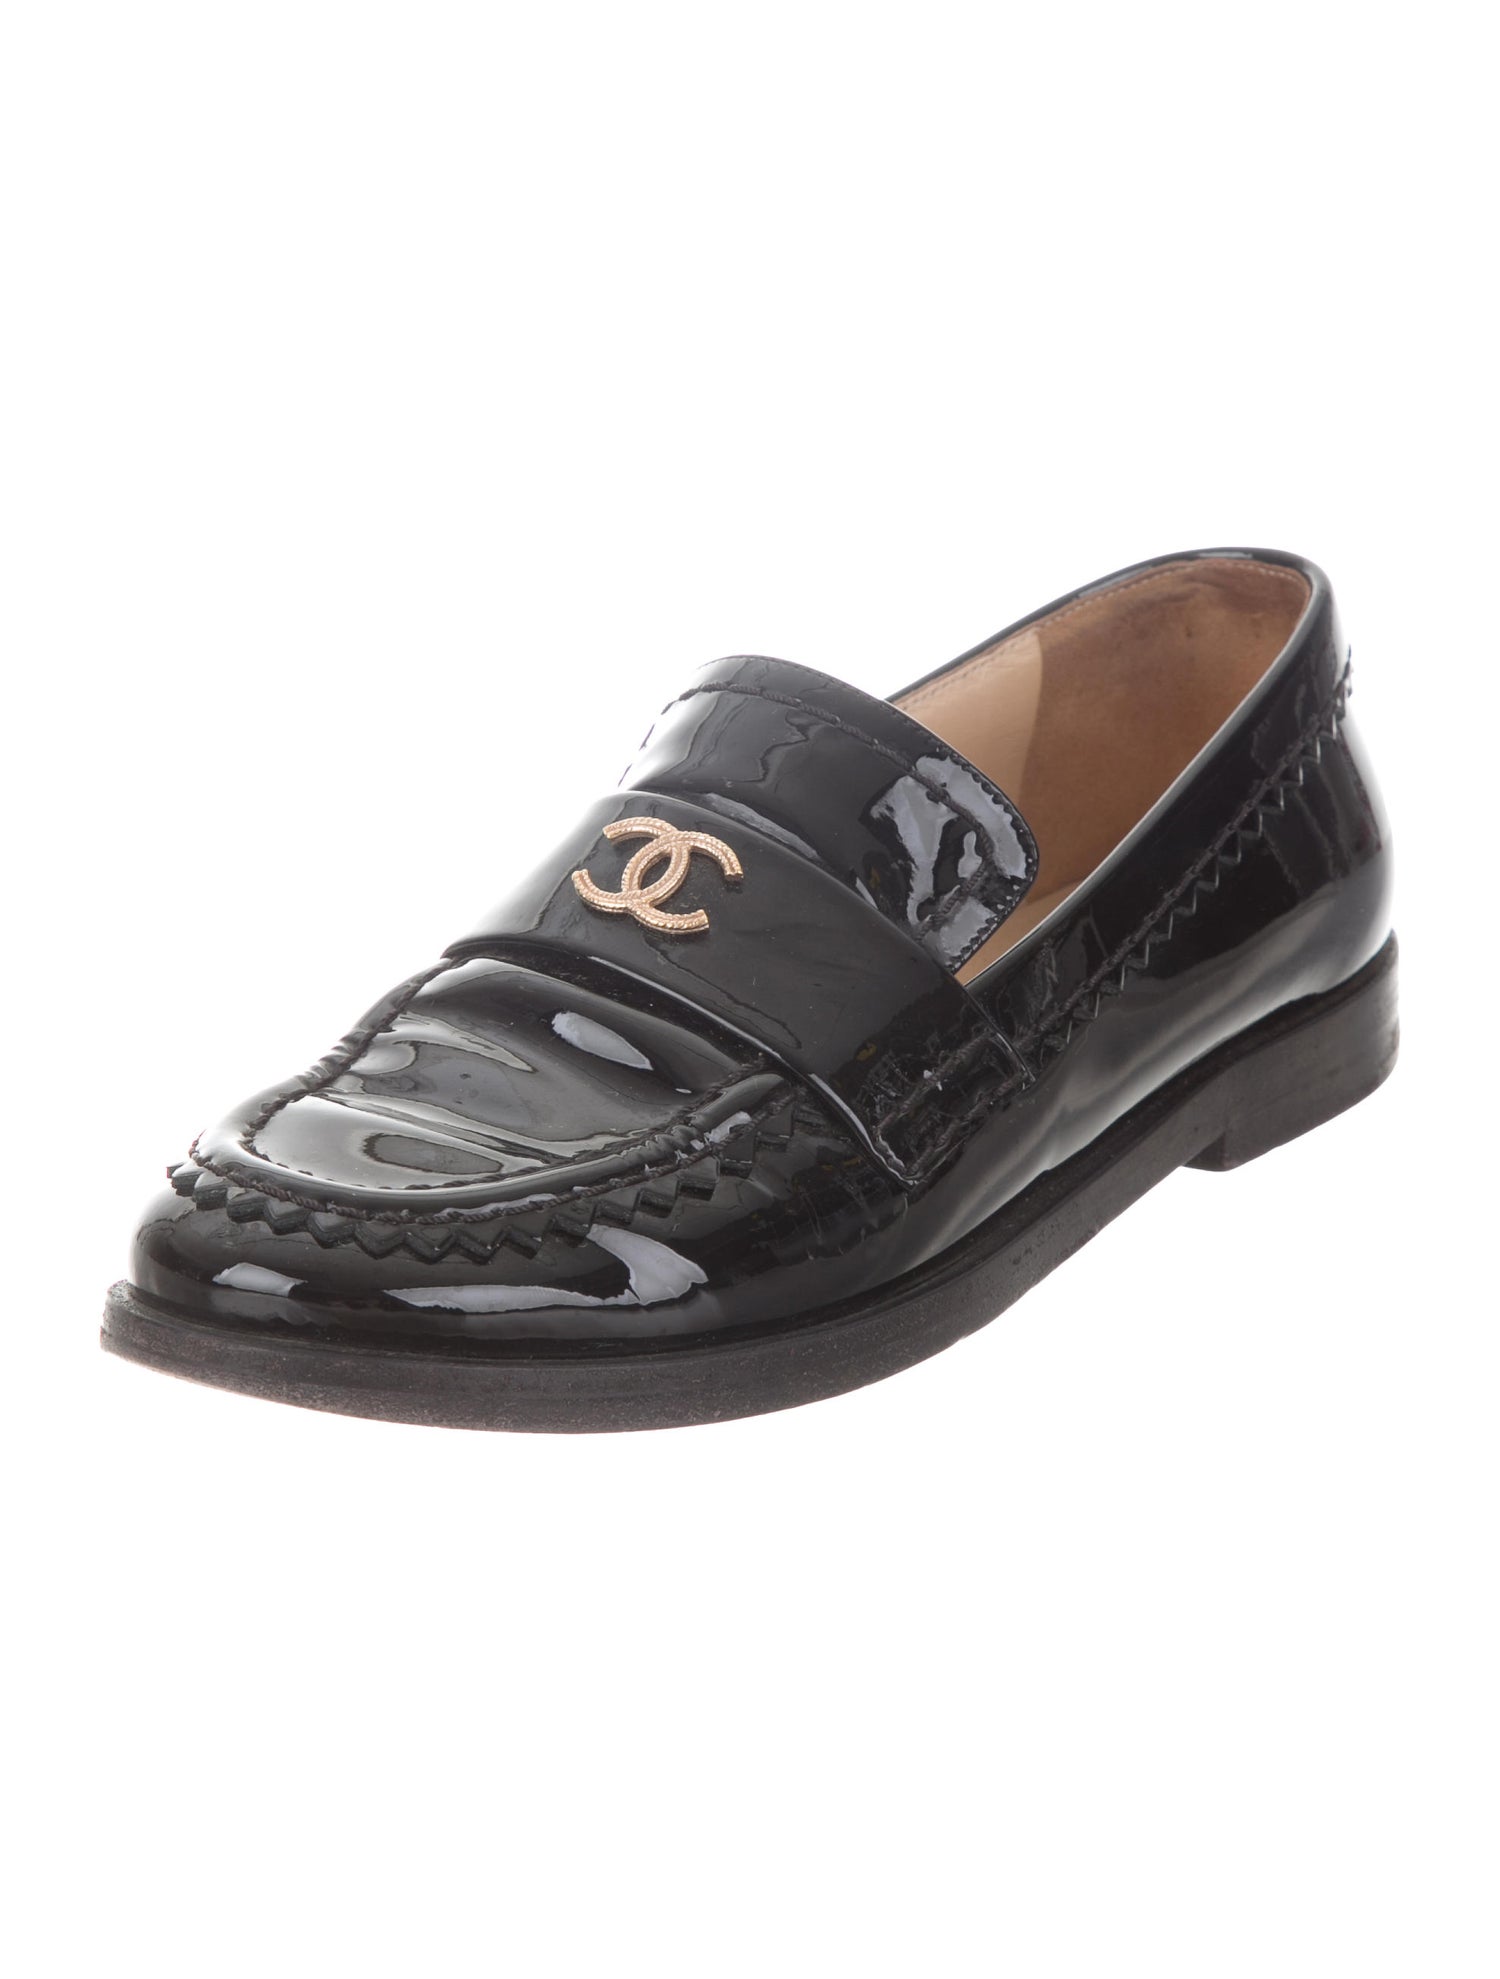 gucci jordaan leather loafer ราคา shoes